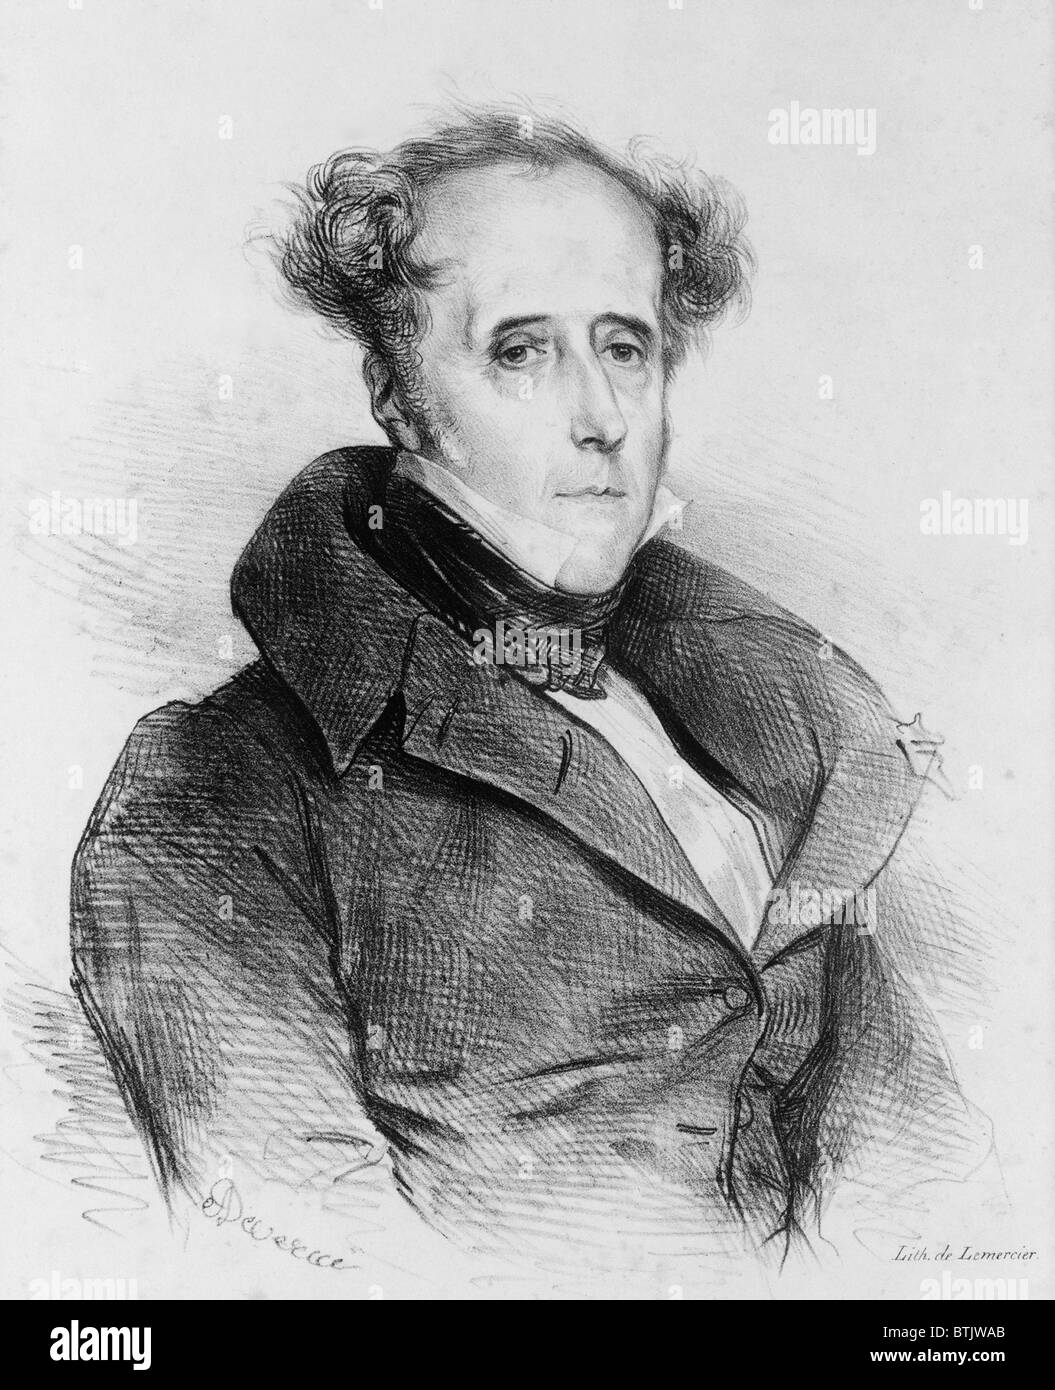 François-Auguste-René, vicomte de Chateaubriand (1768-1848) established many of the emotional and spiritual themes that pervaded Romantic writing in the 19th century. Ca. 1825. Stock Photo